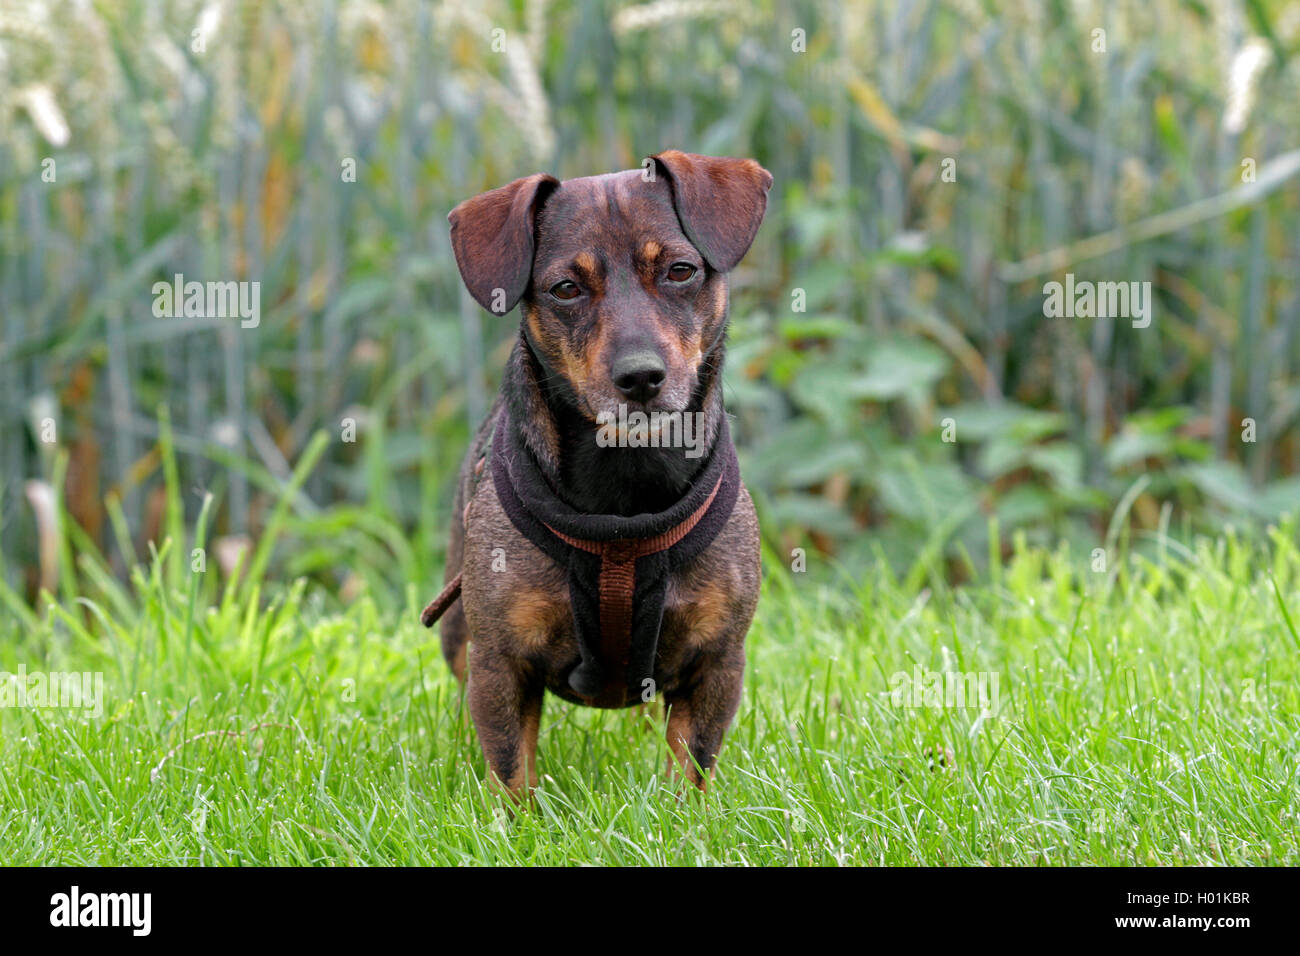 dachshund mixed breed dog, male dog standing in a meadow, Germany Stock Photo